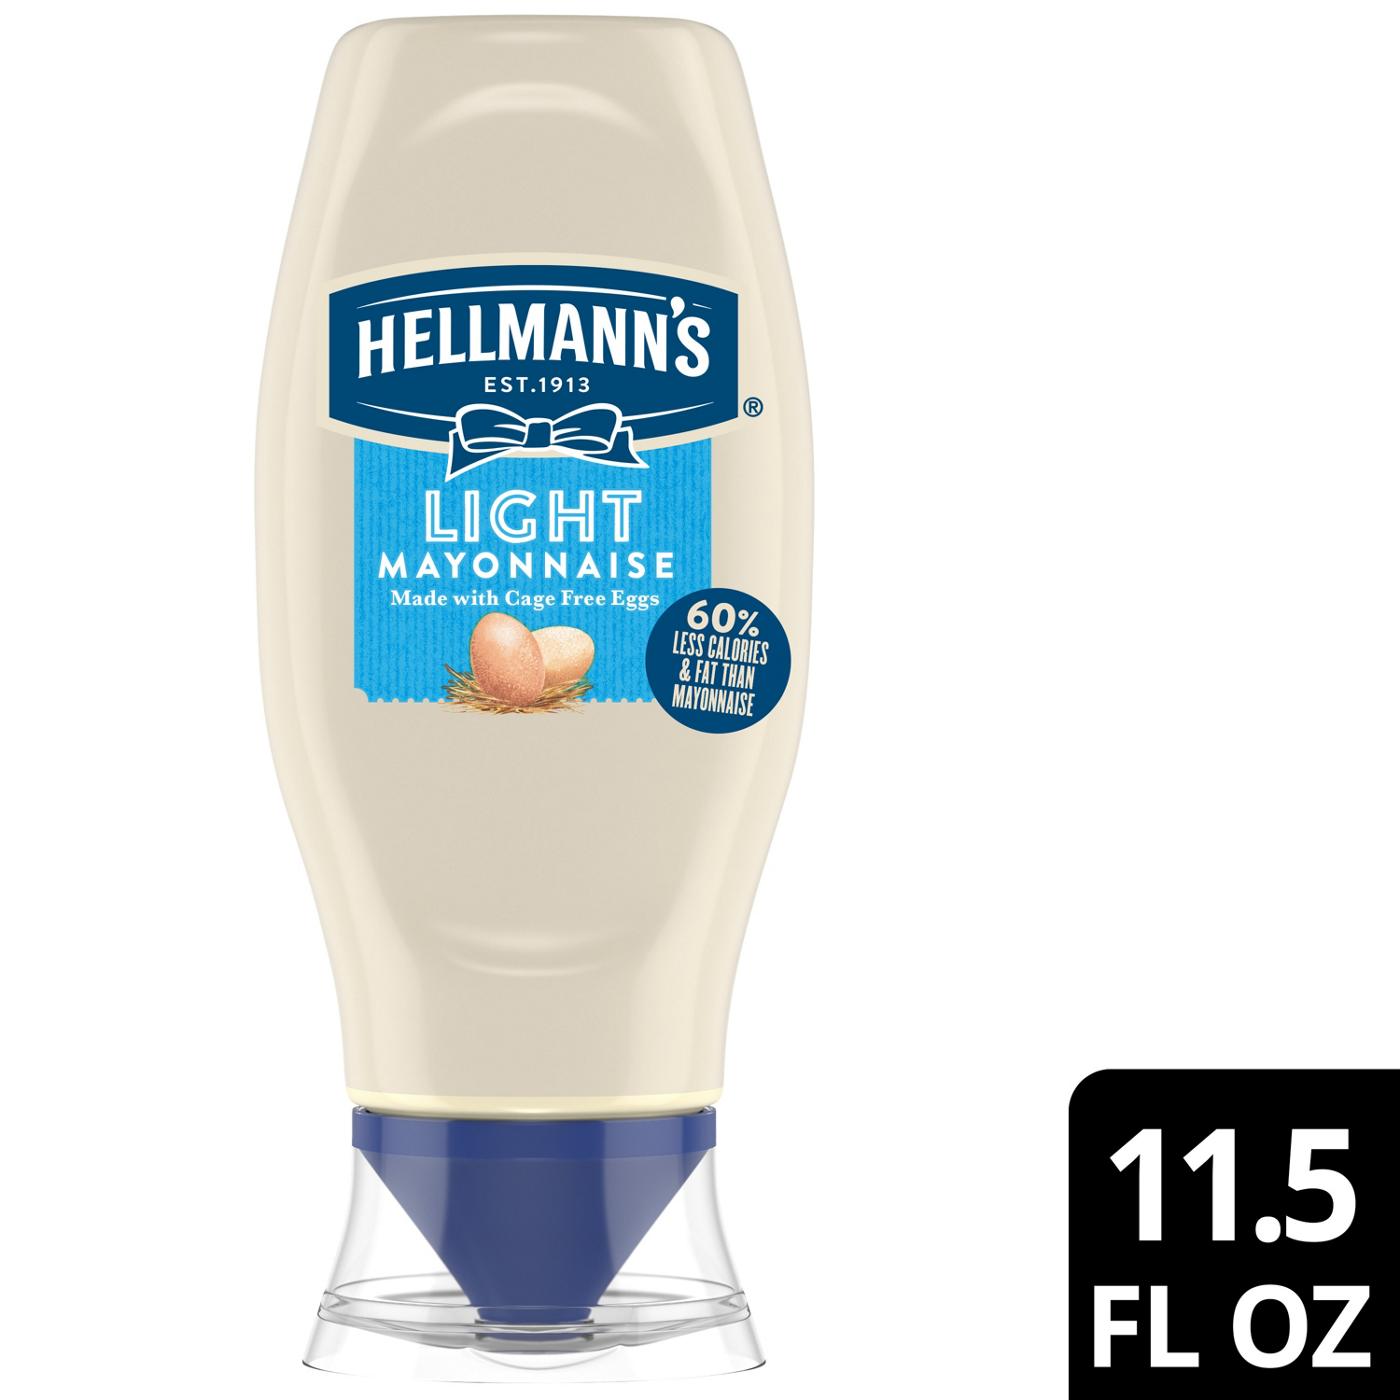 Hellmann's Squeeze Light Mayonnaise; image 7 of 7